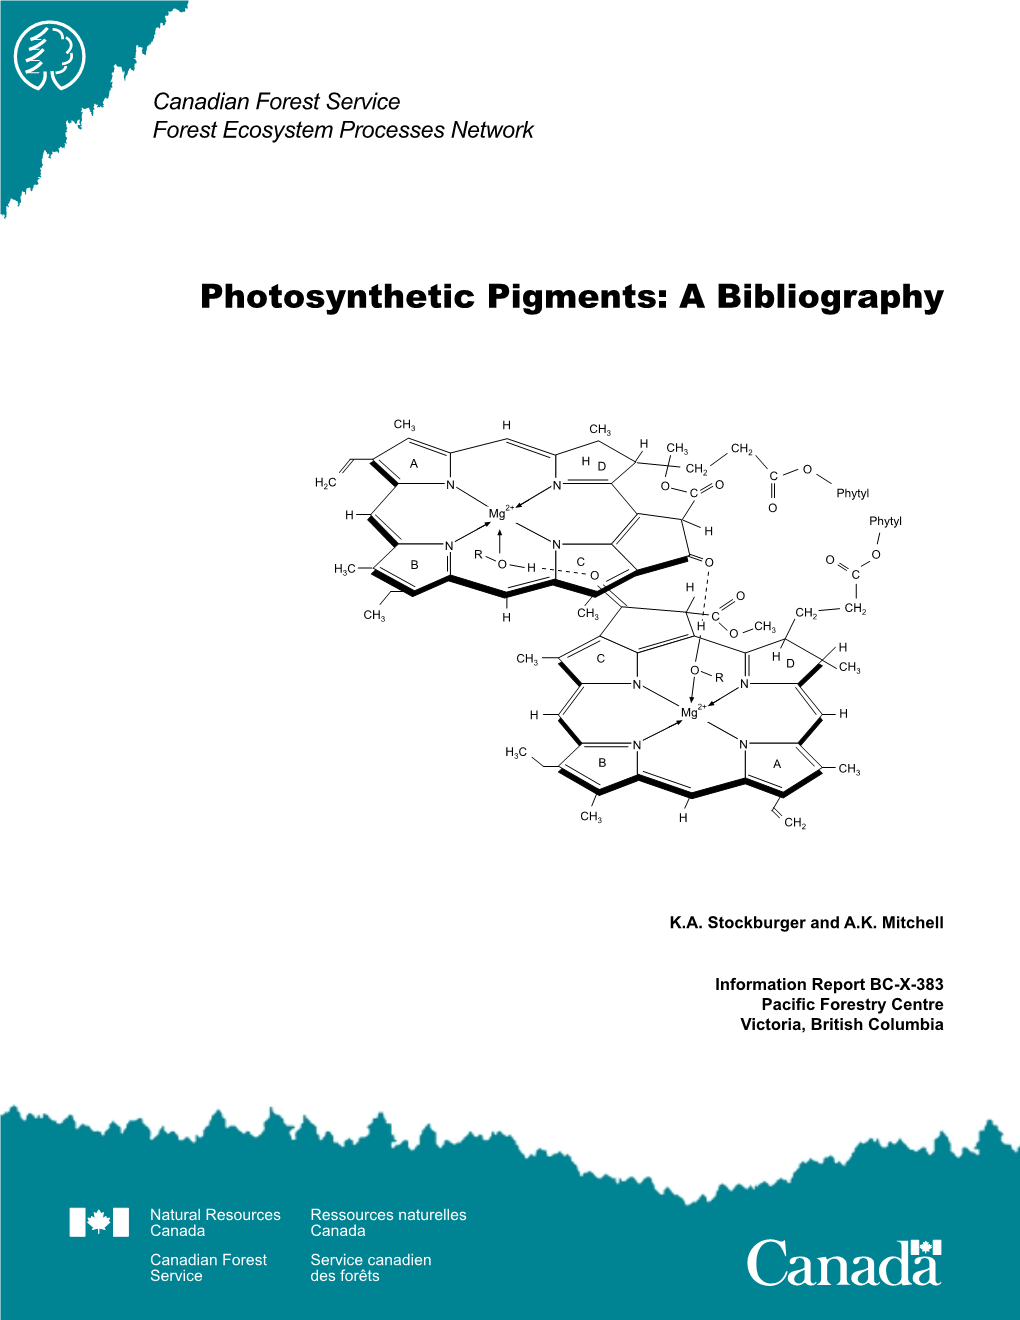 Photosynthetic Pigments: a Bibliography